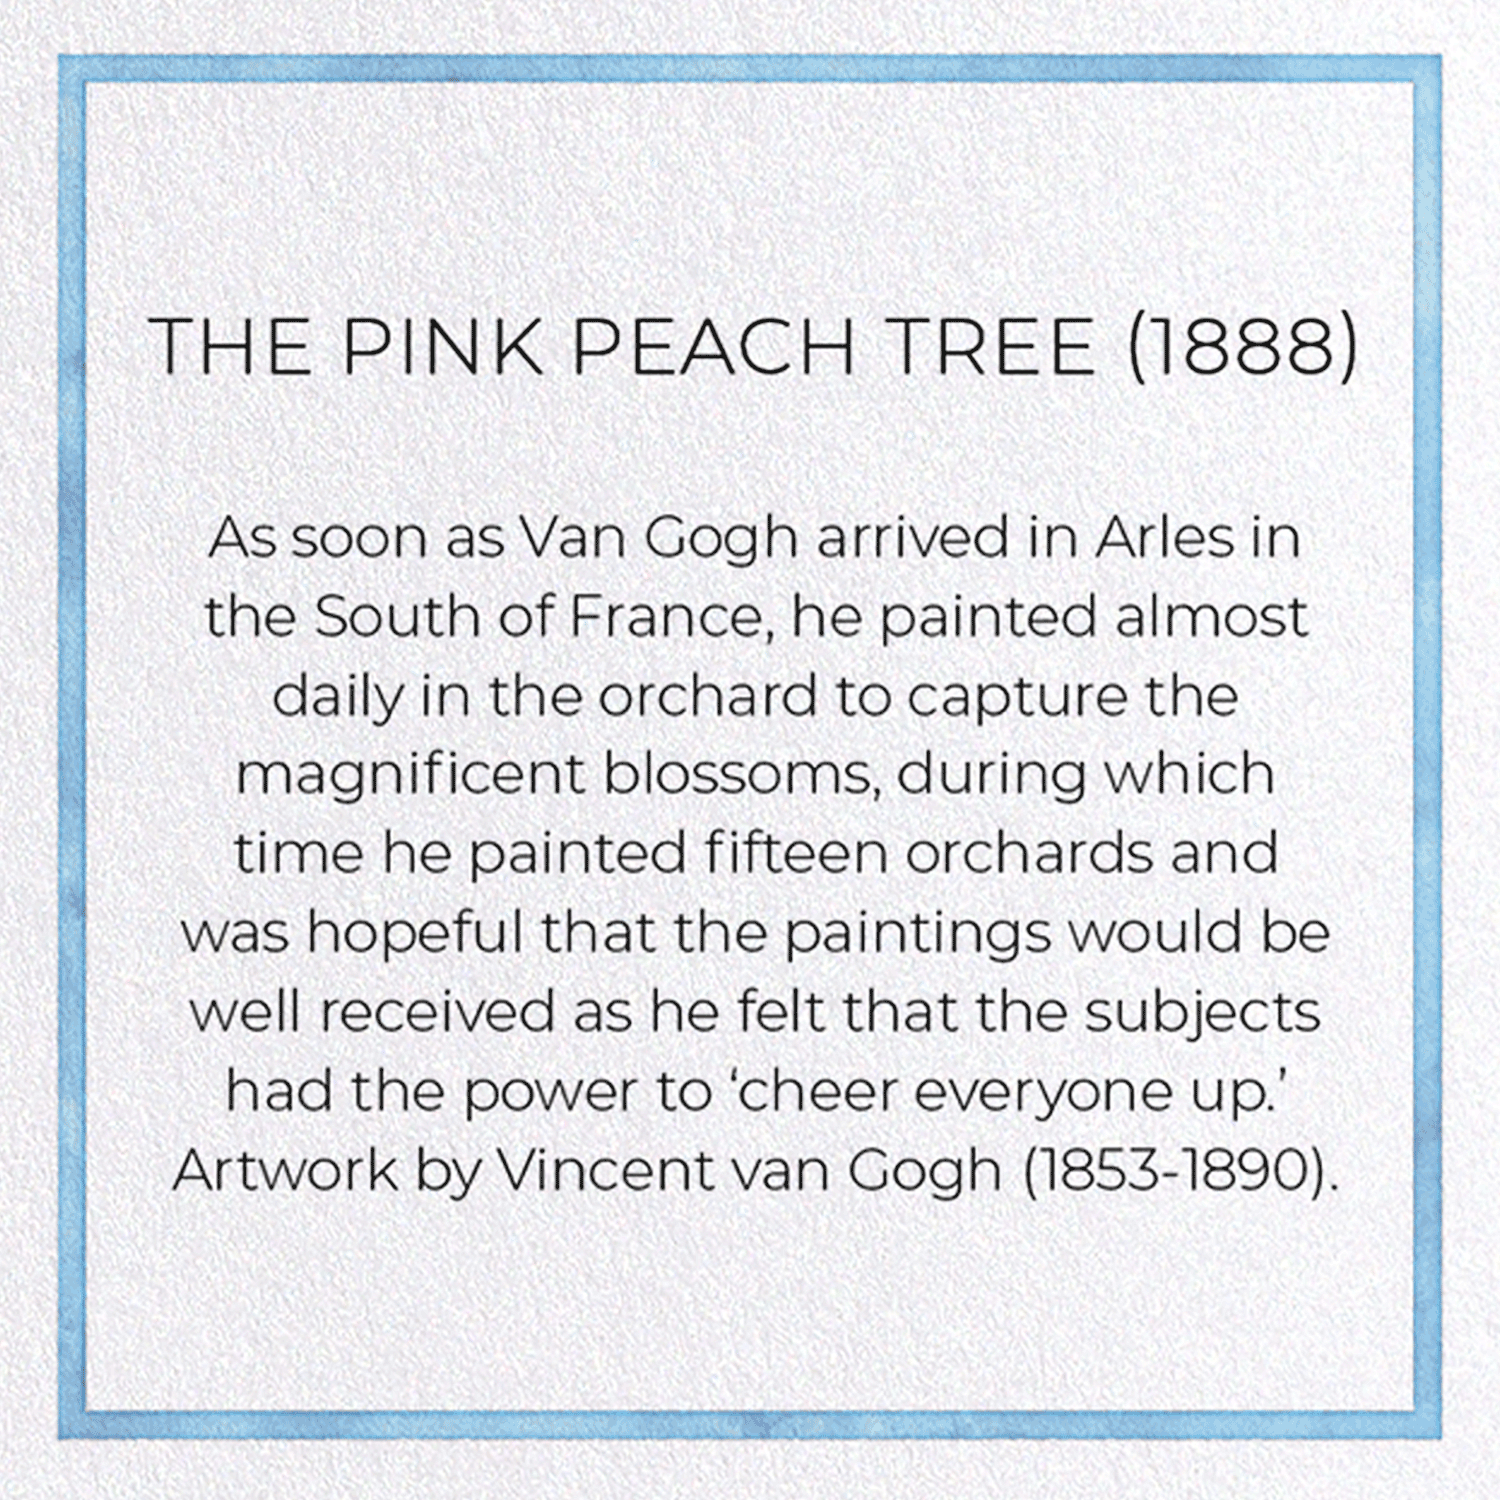 THE PINK PEACH TREE (1888): Painting Greeting Card